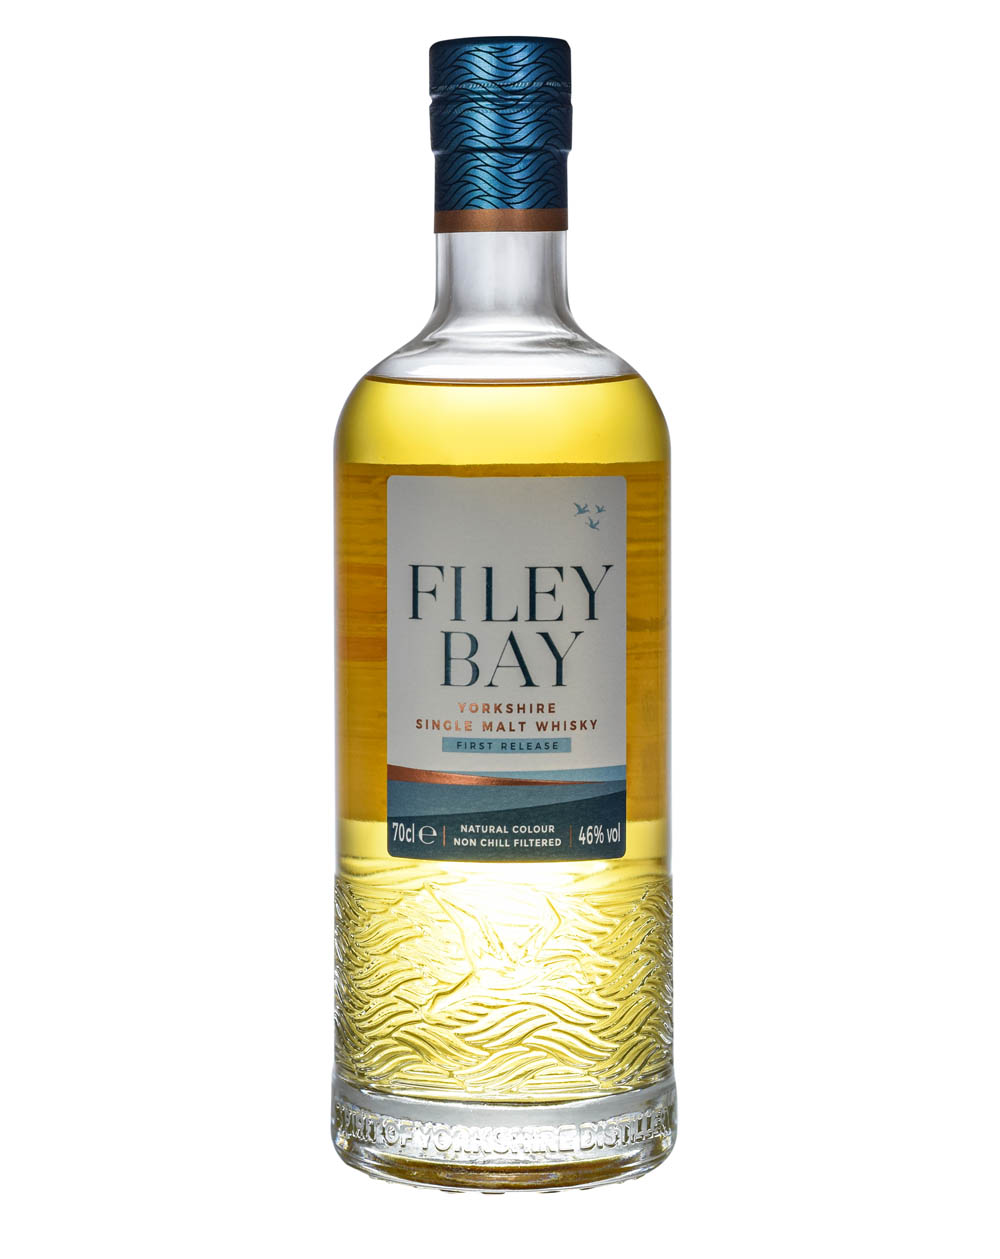 Filey Bay Inaugural Release Yorkshire Single Malt Musthave Malts MHM